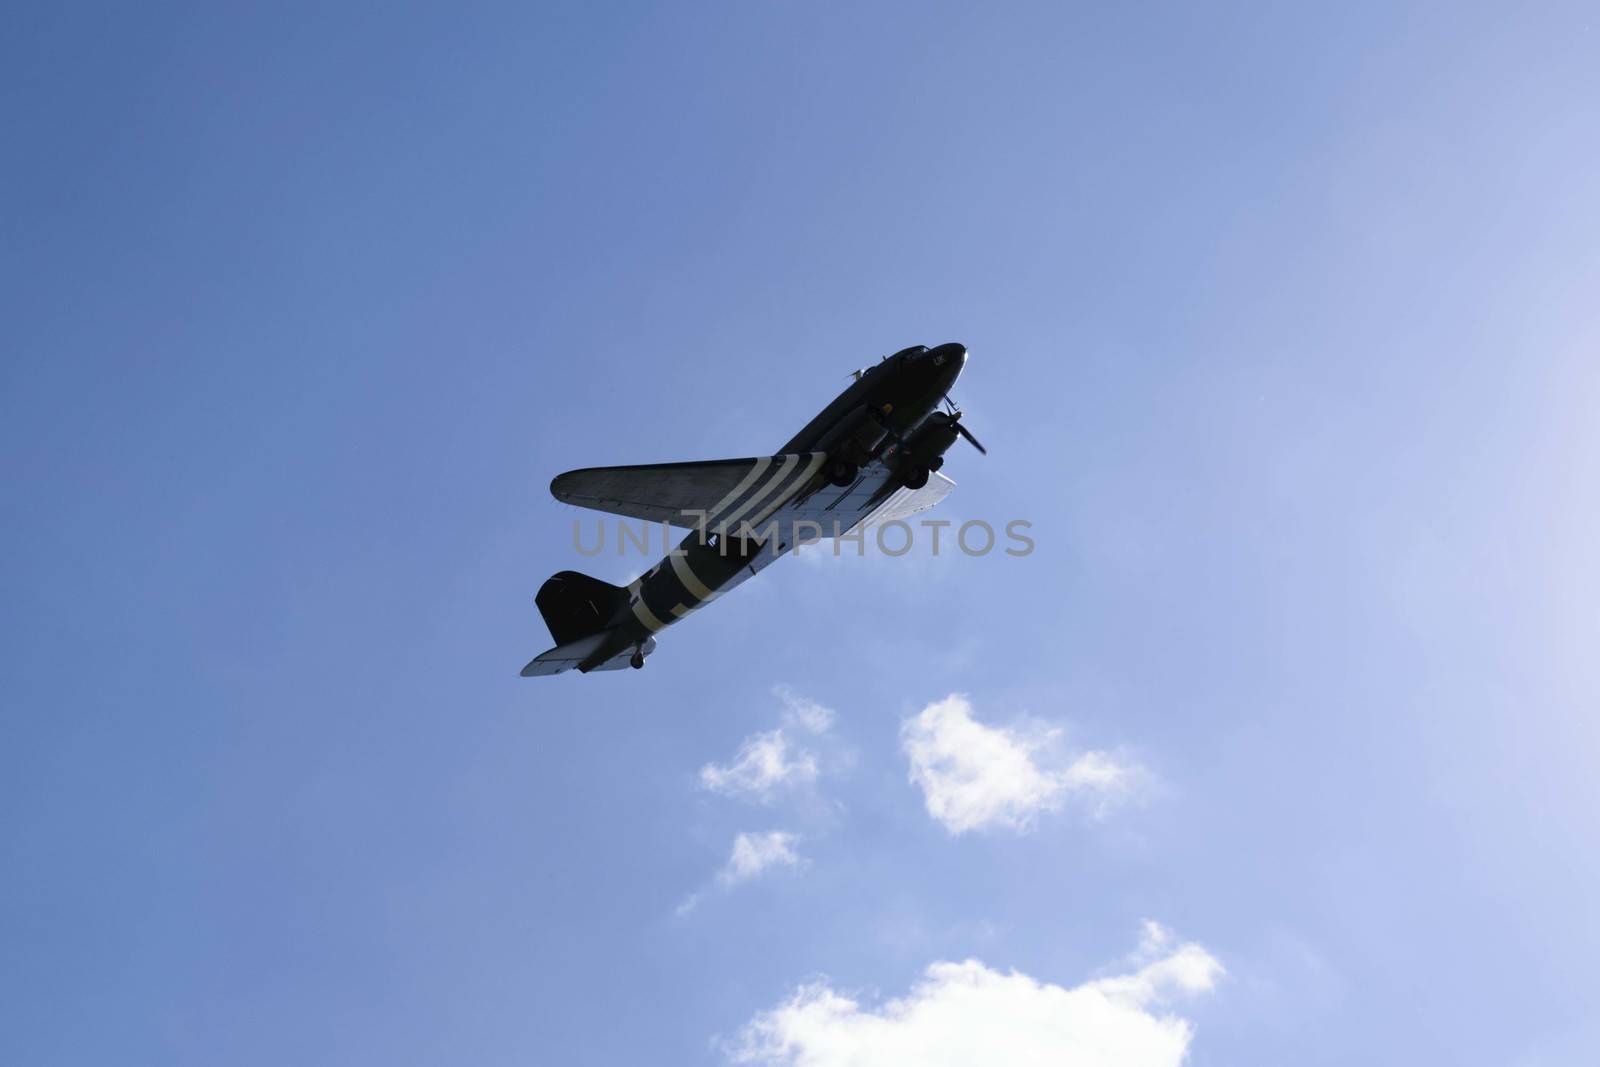 UK, Quorn - June 2015: Spitfire in the skies above Britain